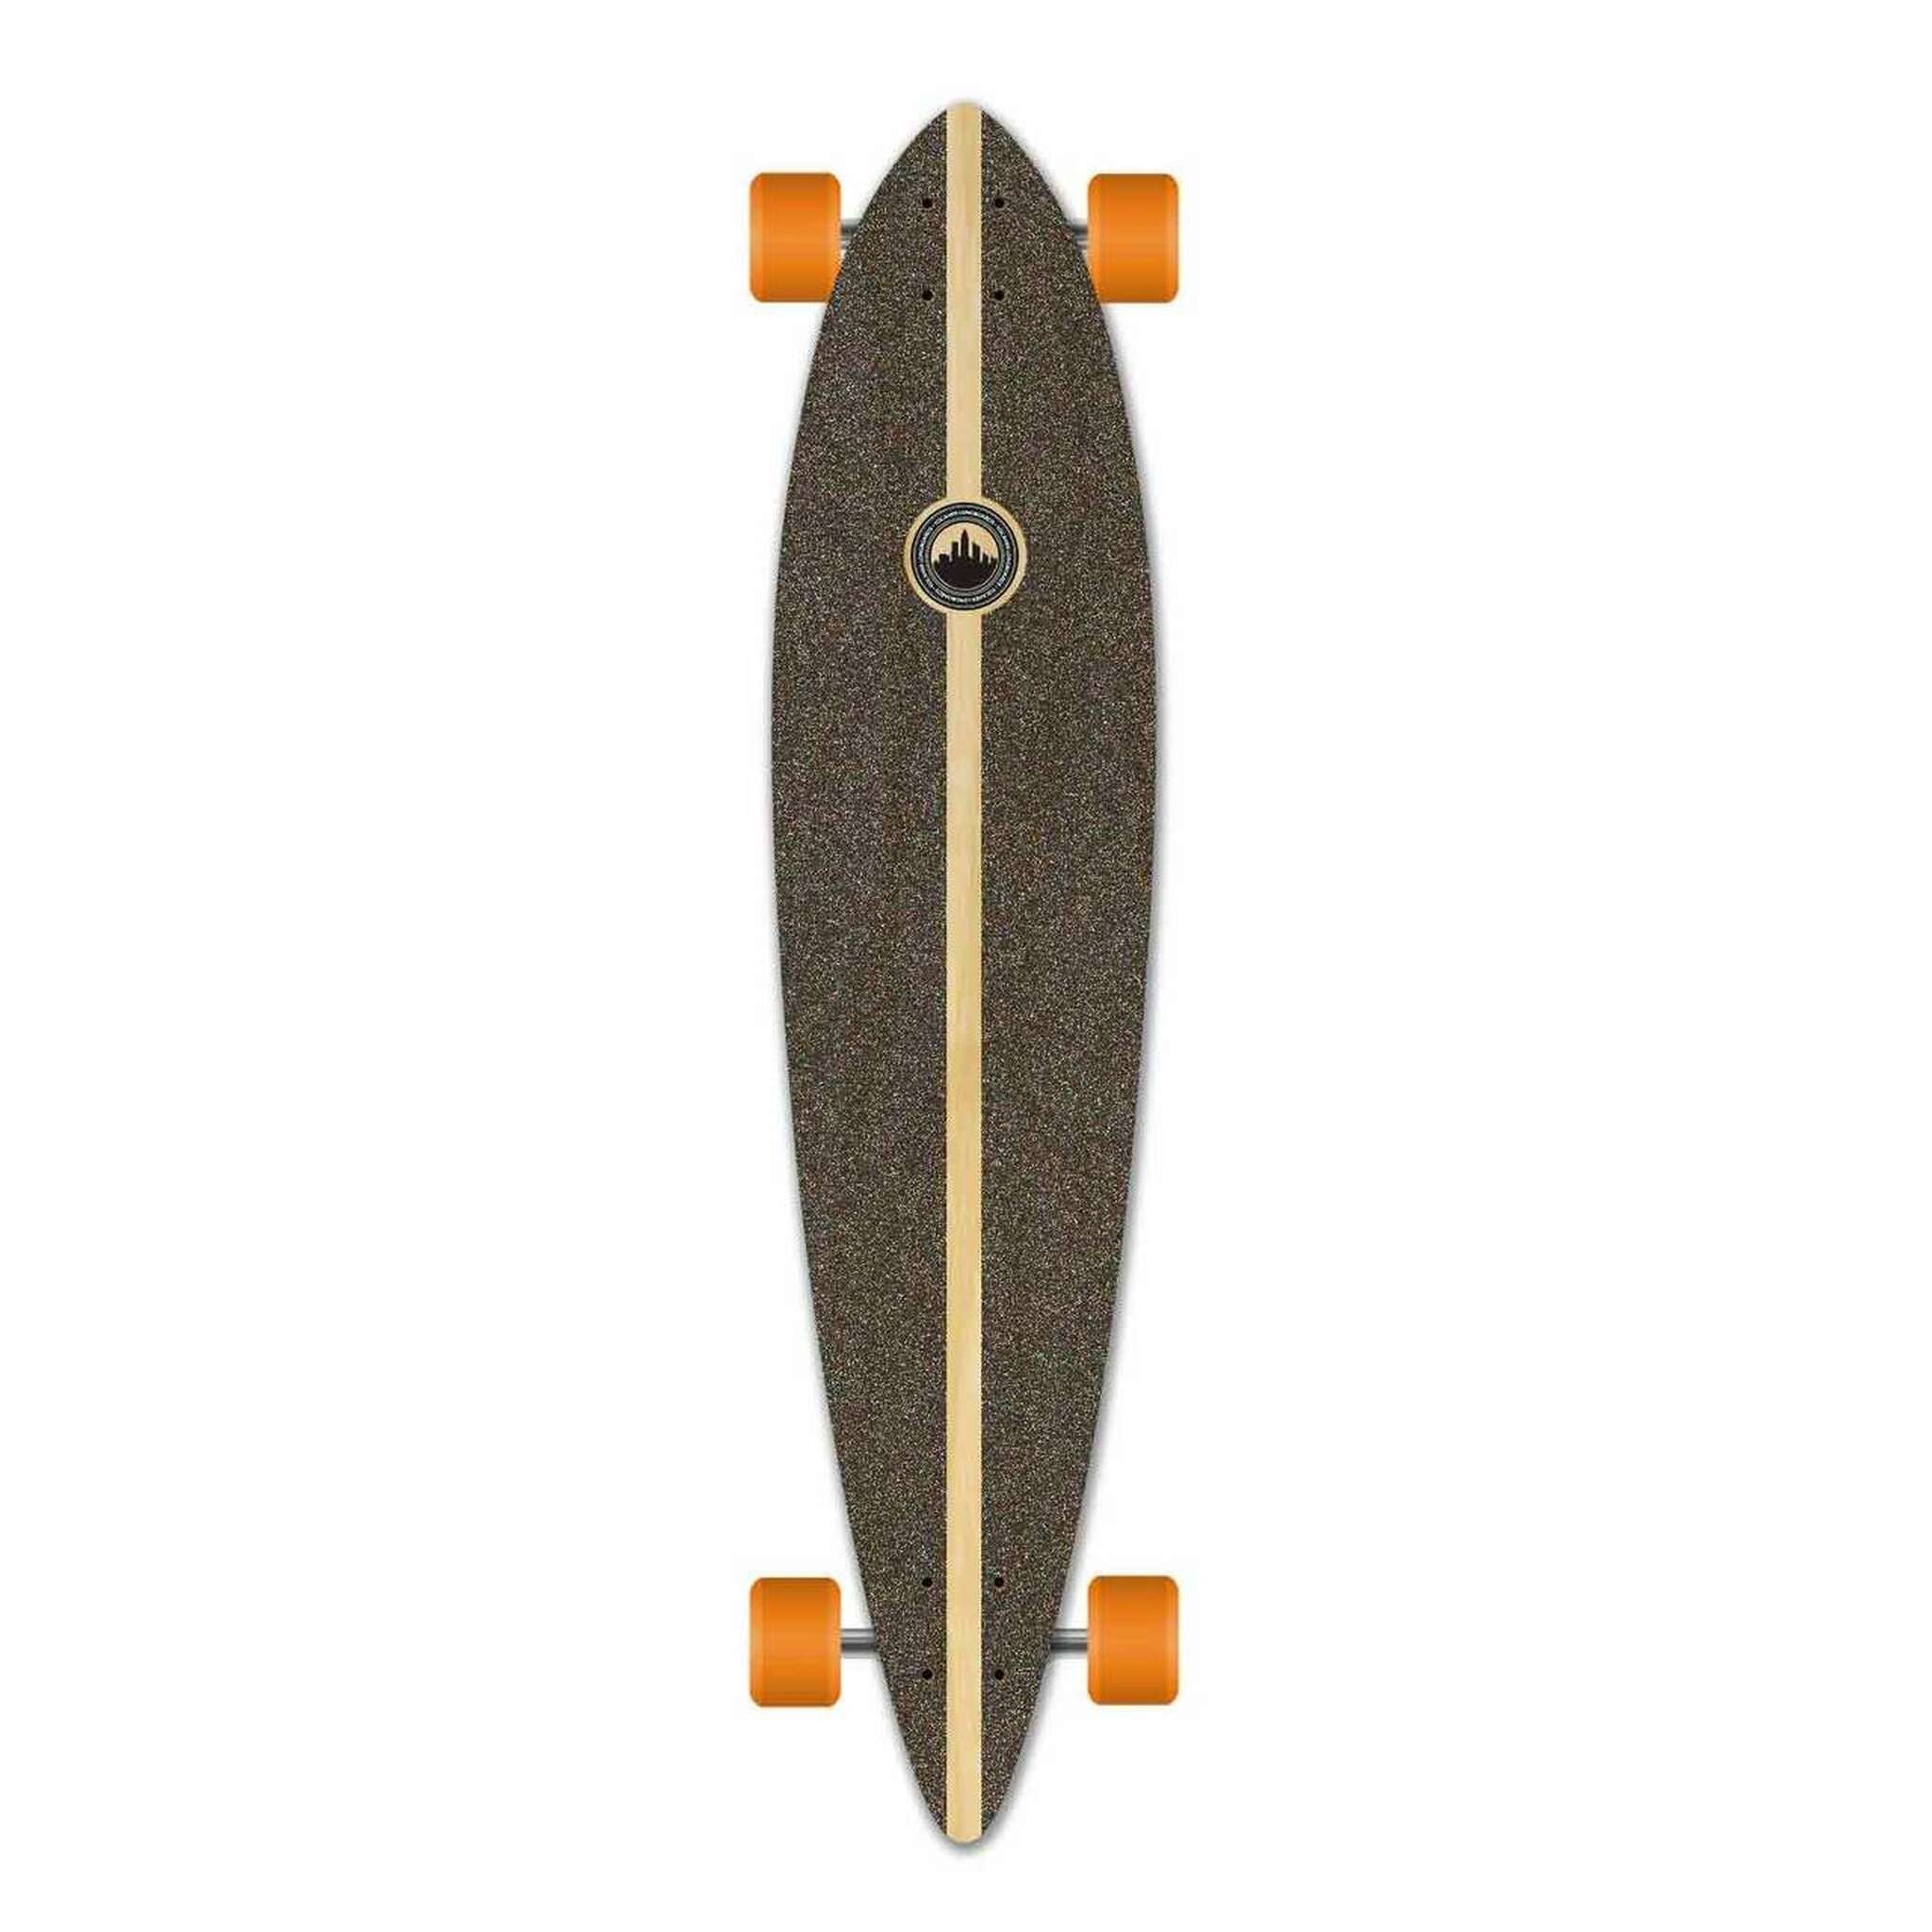 YOCAHER - San Francisco Pintail Longboard - Planche Complete